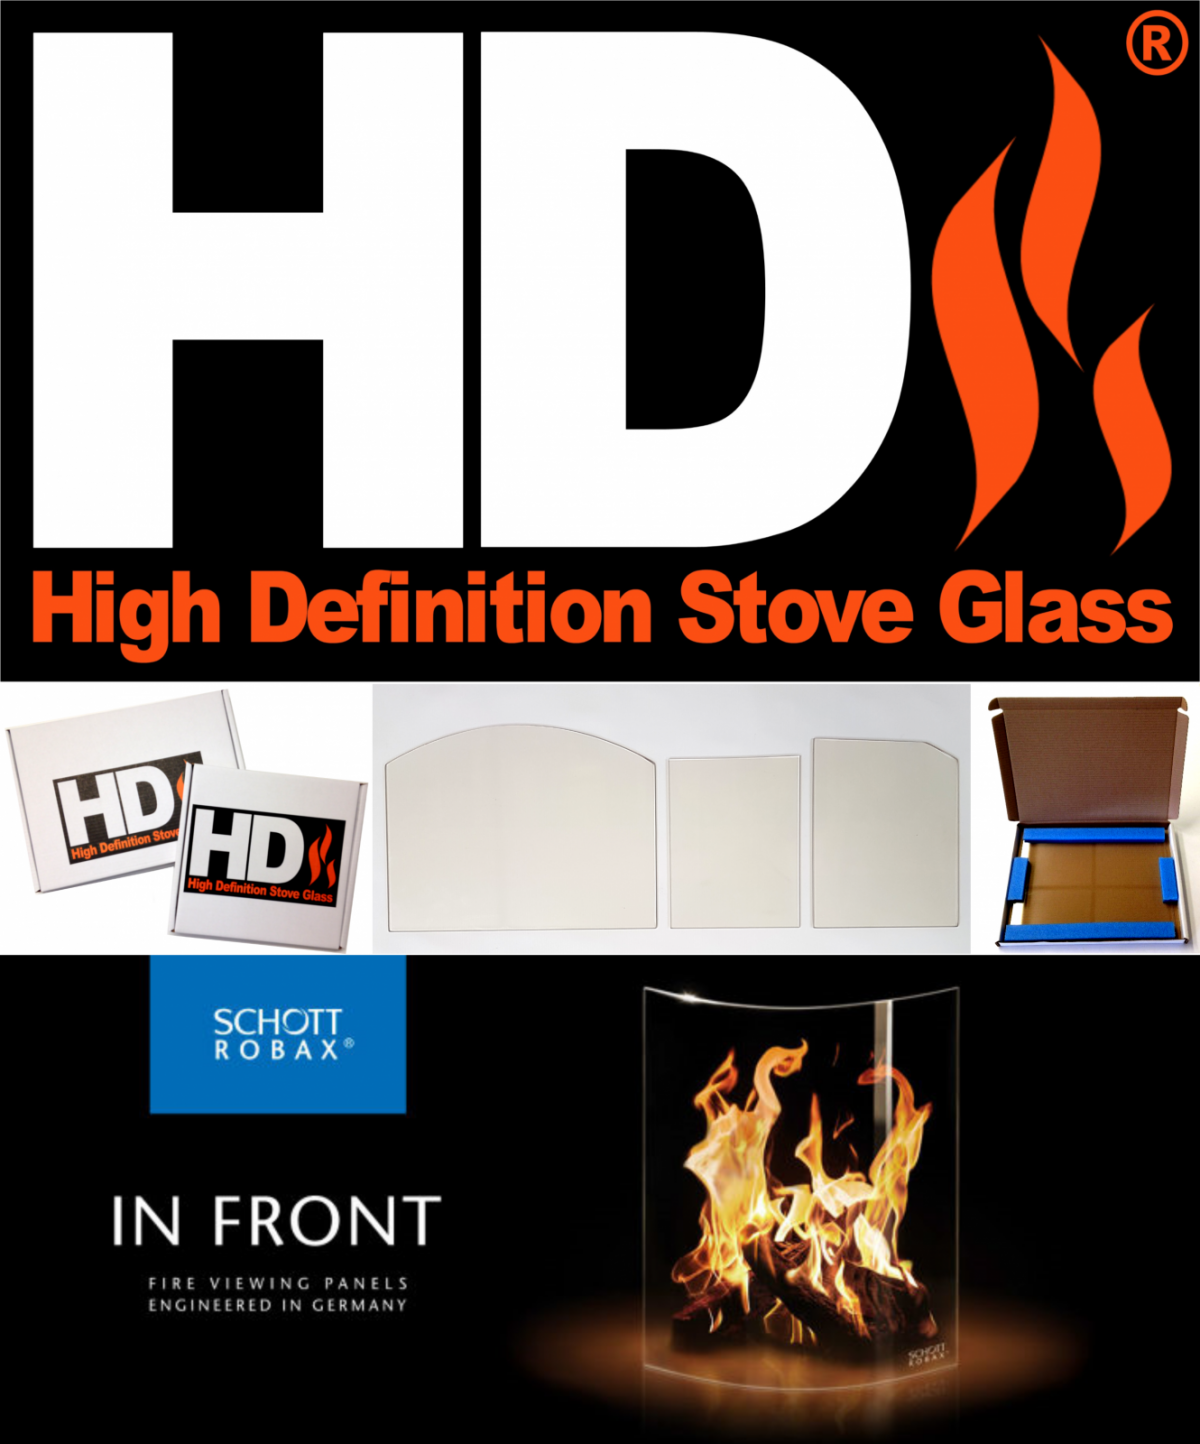 High Definition Stove Glass for the Barbas